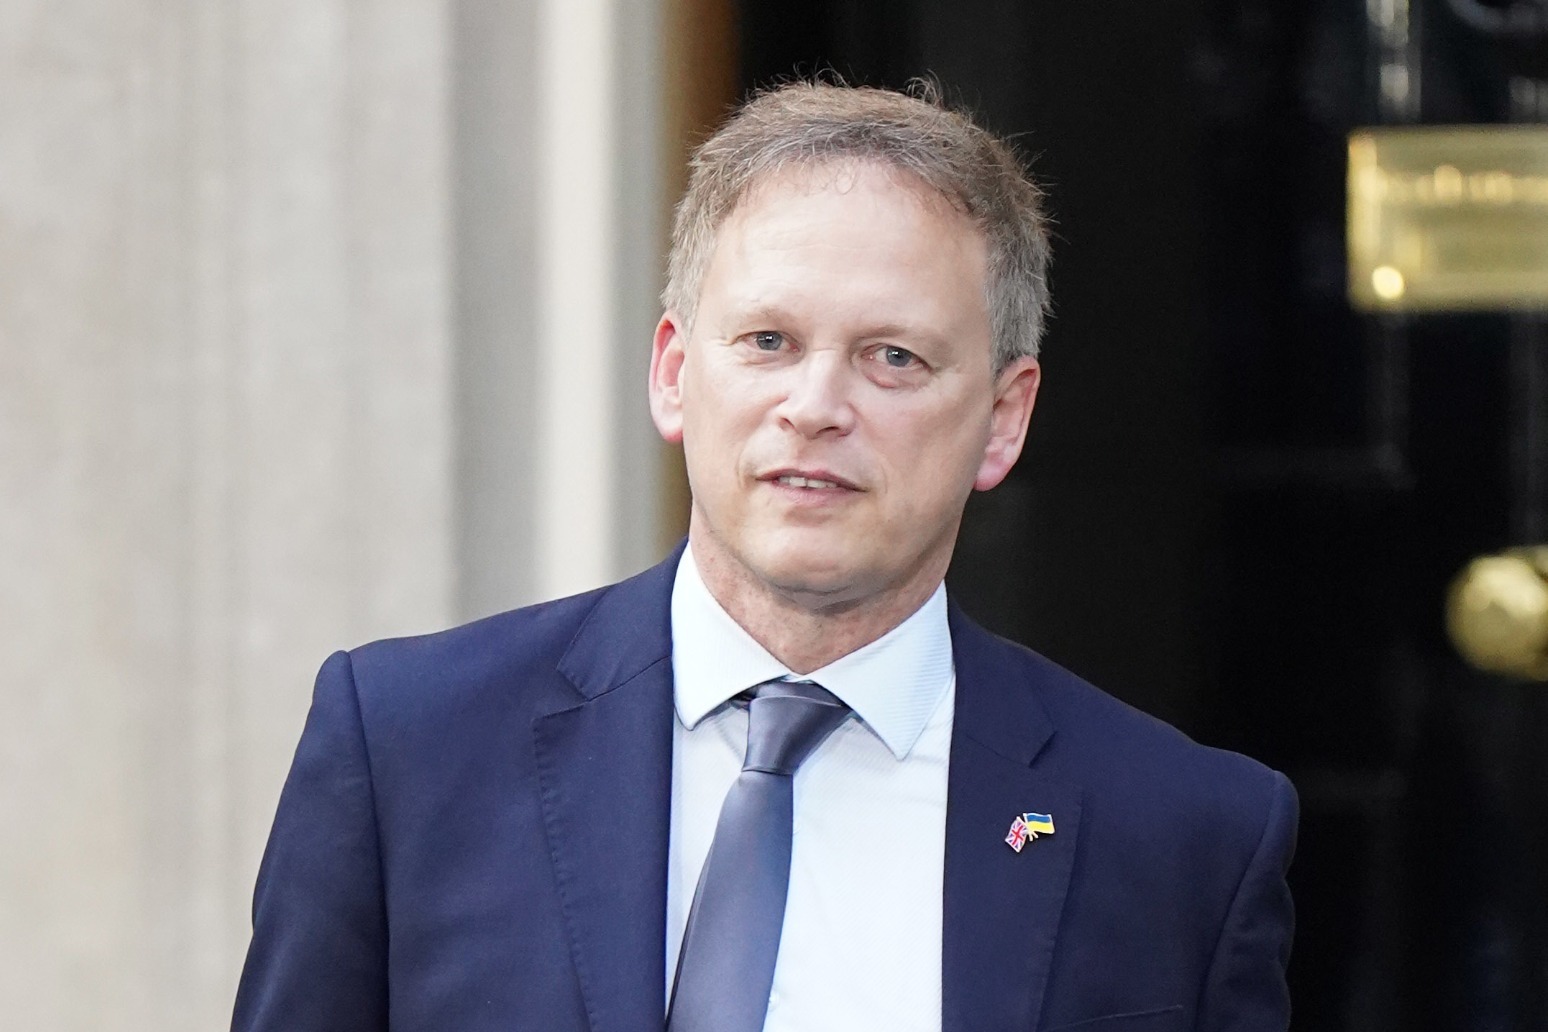 Grant Shapps says he will not vote for Matt Hancock on I’m A Celebrity 